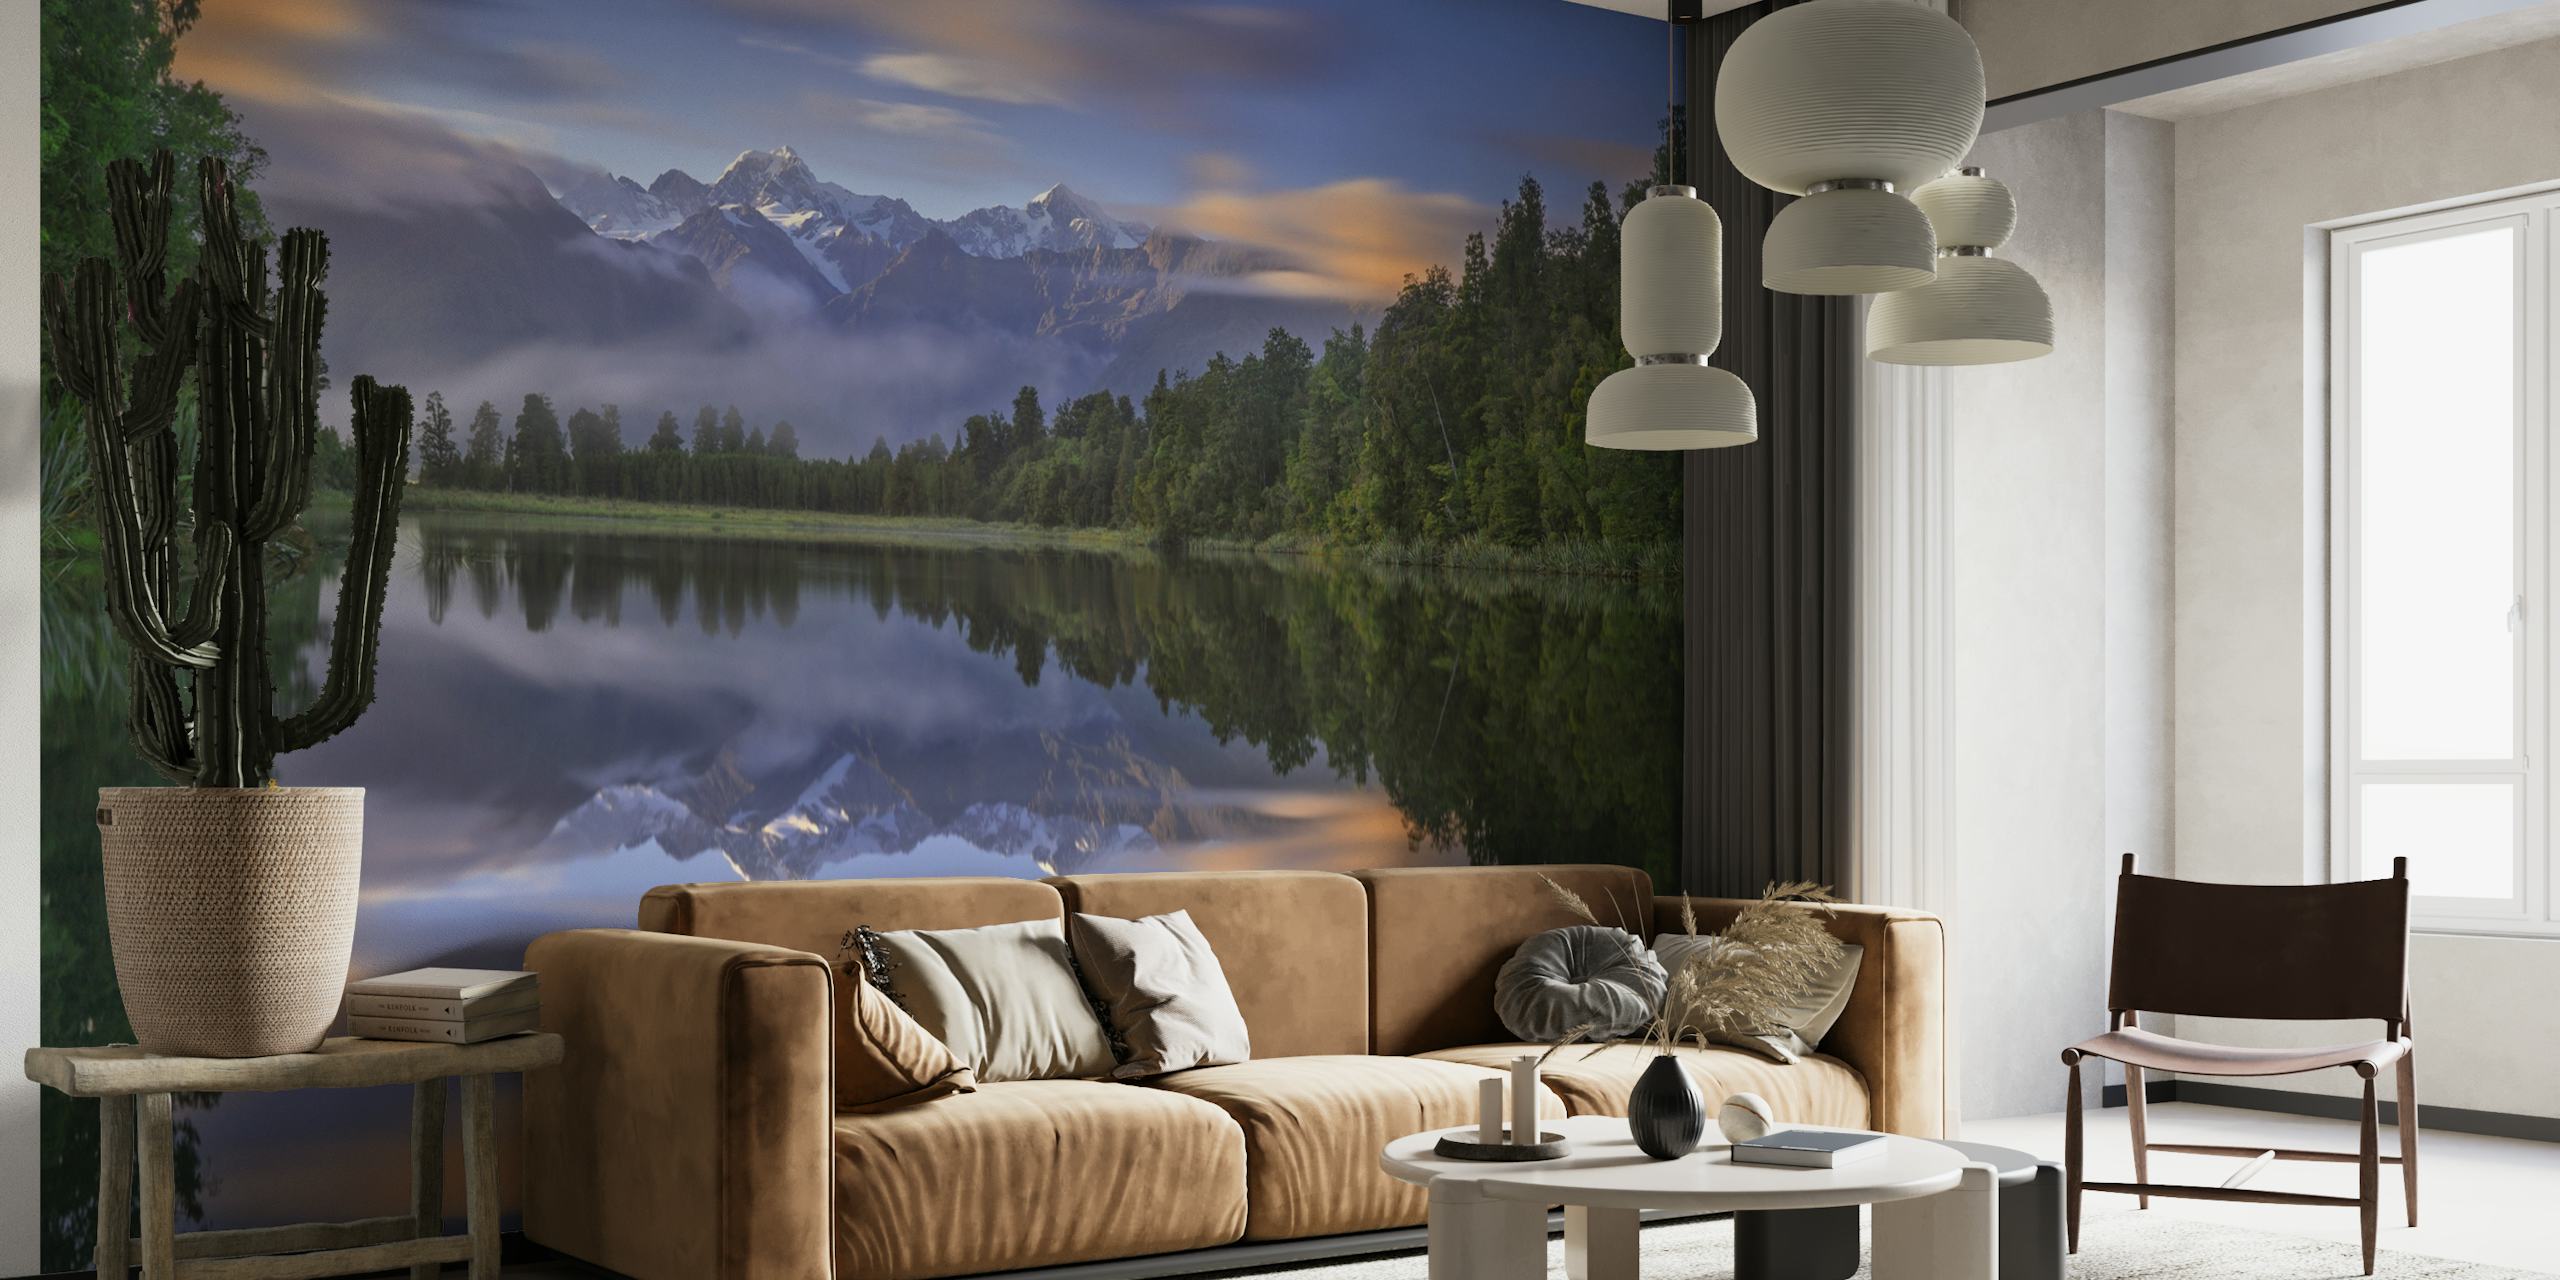 Lake Matheson wall mural with reflective waters and snow-capped mountains